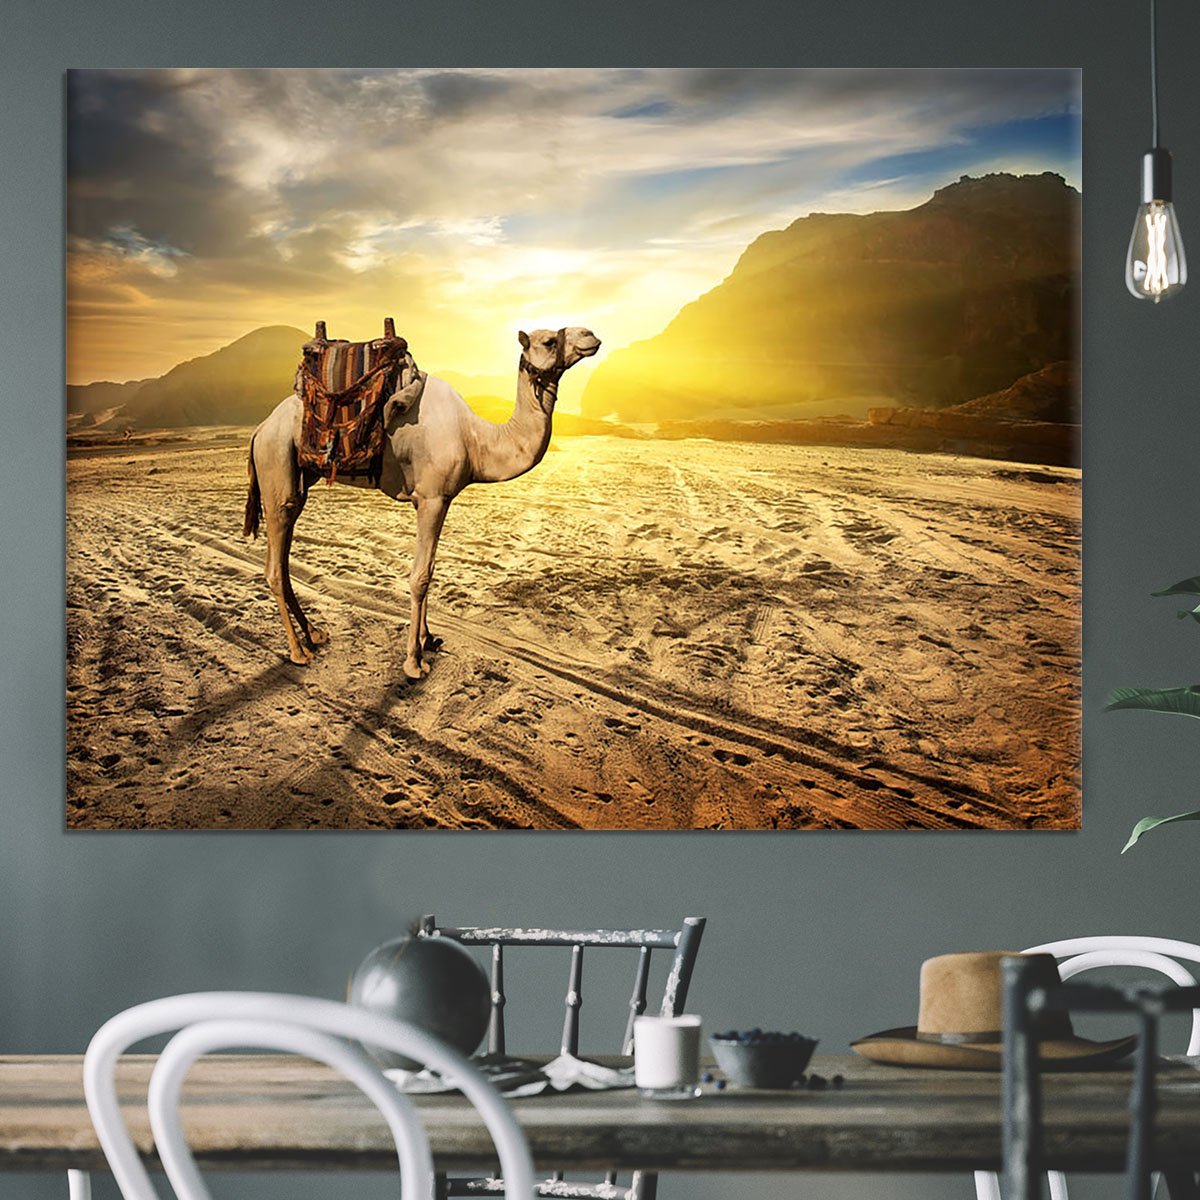 Camel in sandy desert near mountains at sunset Canvas Print or Poster